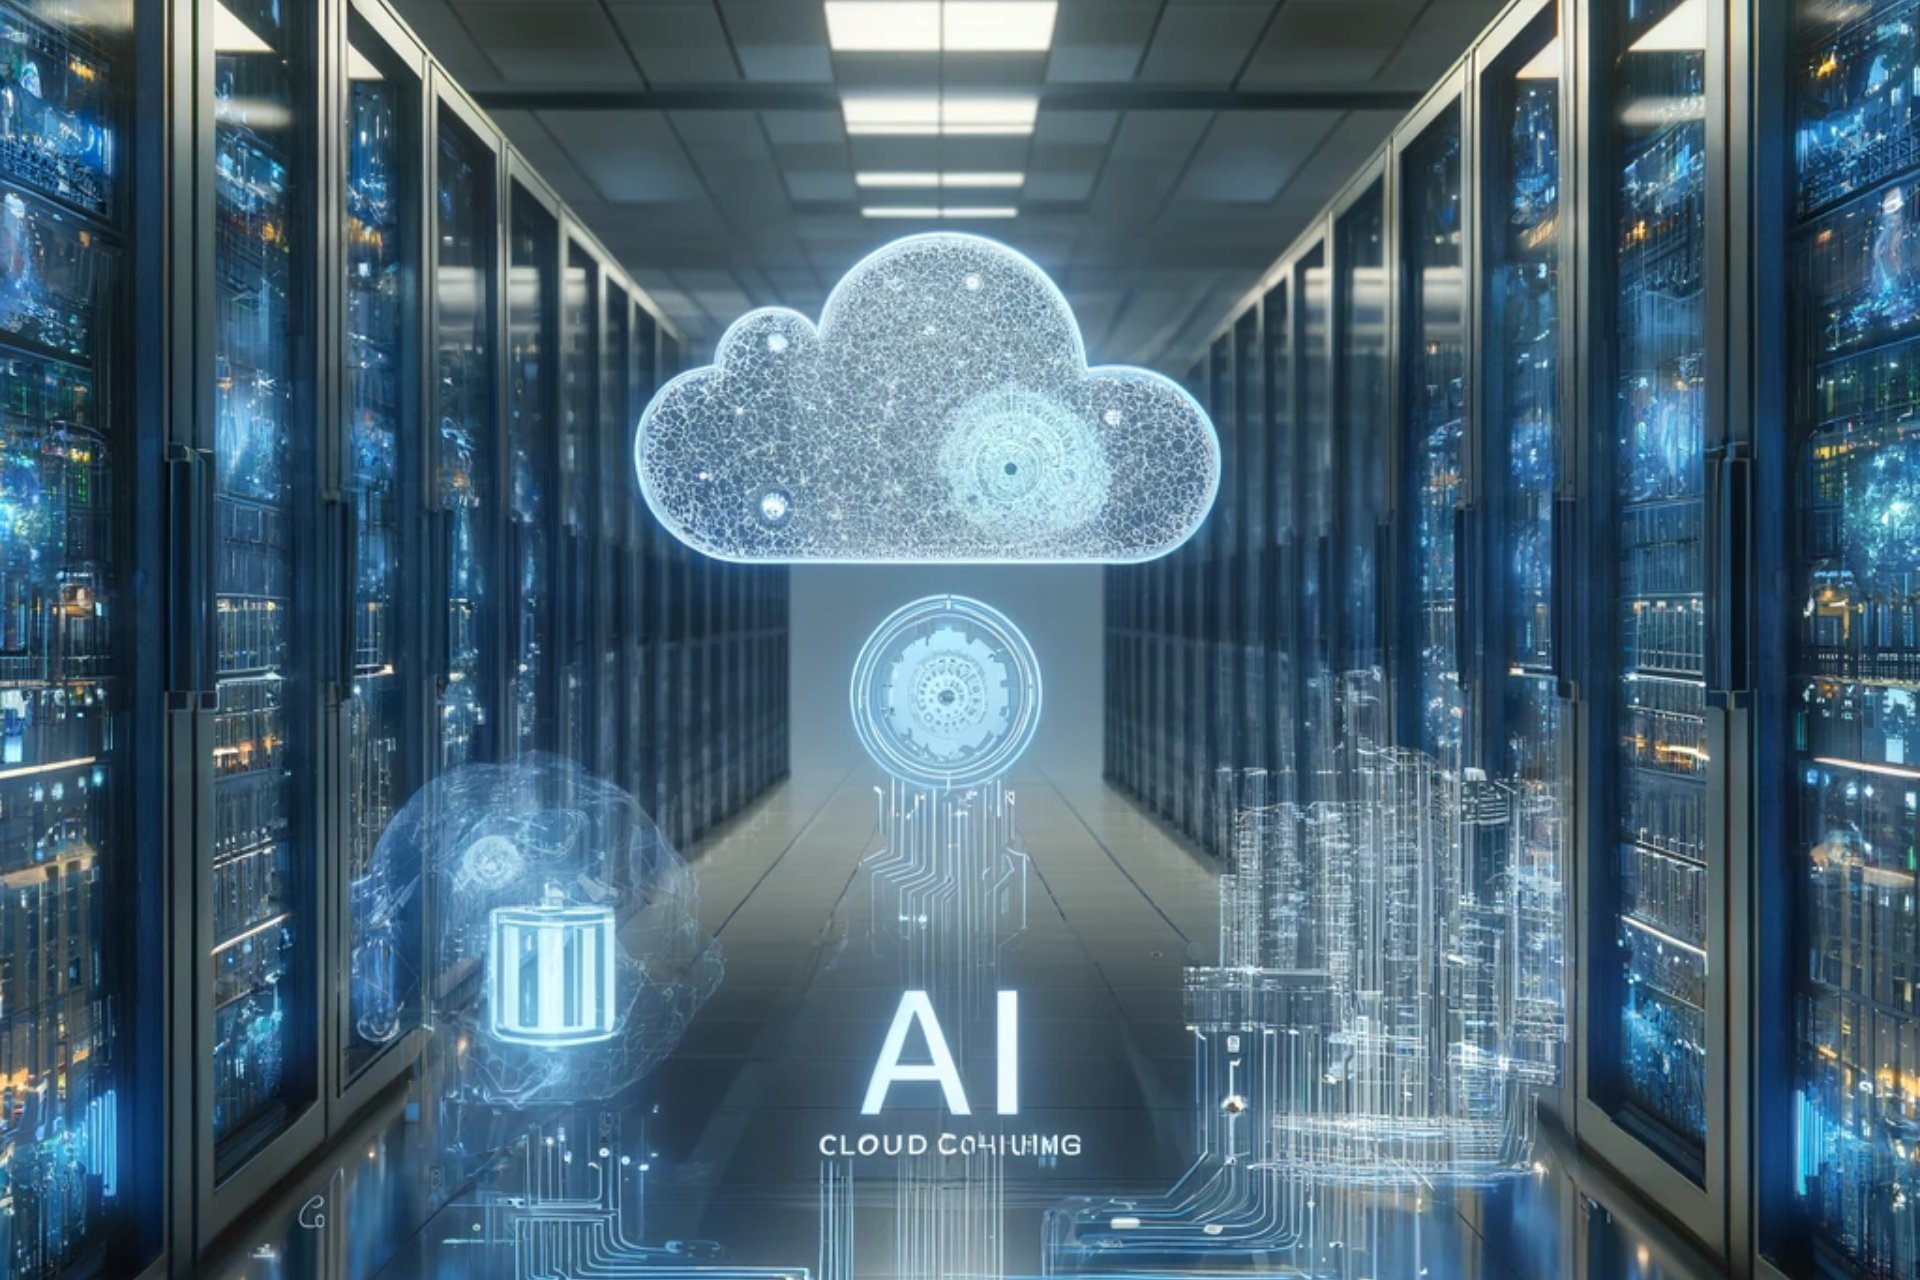 Oracle boosts AI cloud services investments